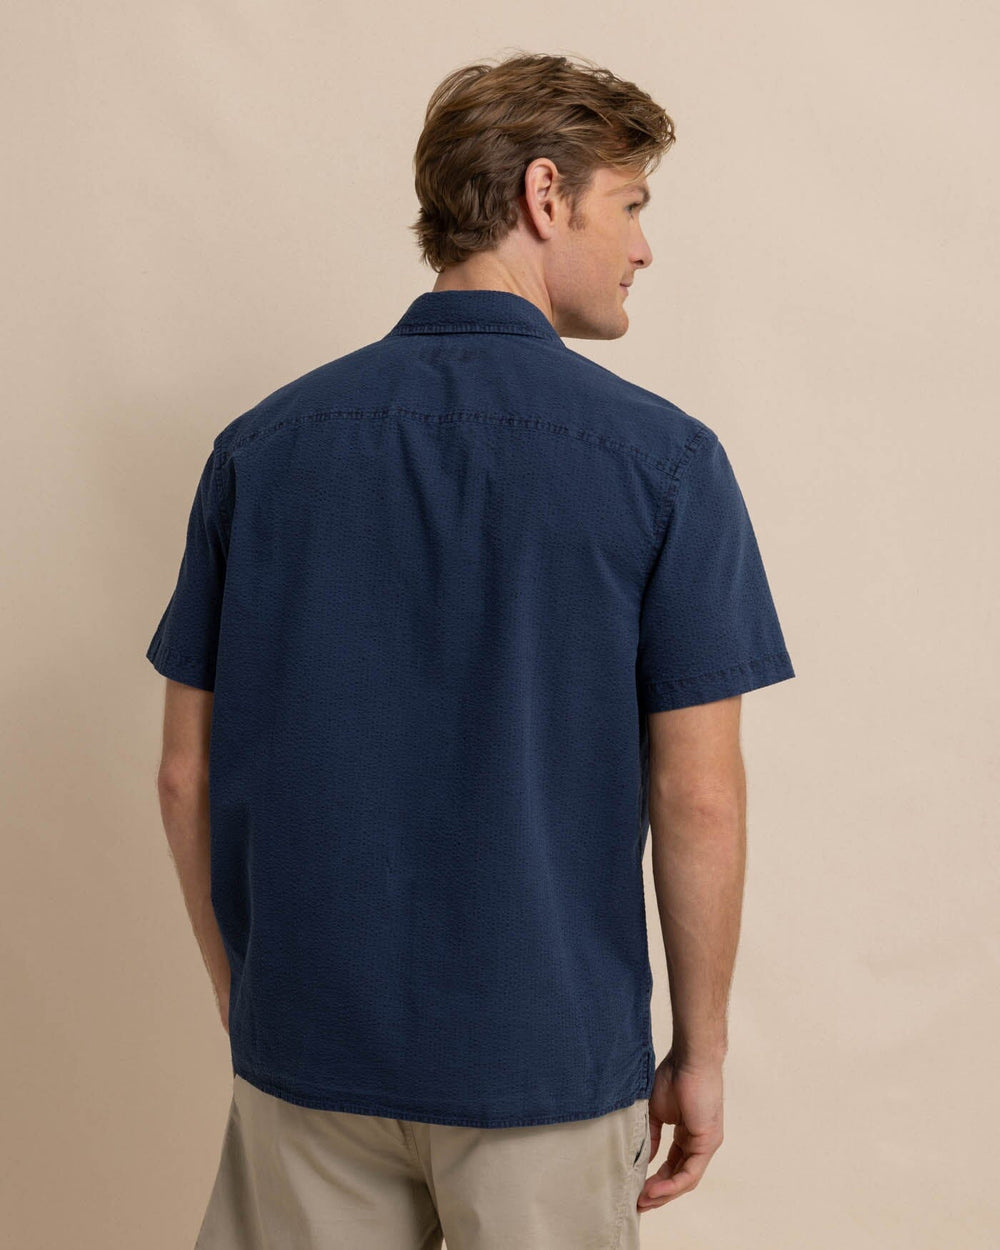 The back view of the Southern Tide Sun Washed Seerscuker Camp Short Sleeve Sport Shirt by Southern Tide - Dress Blue